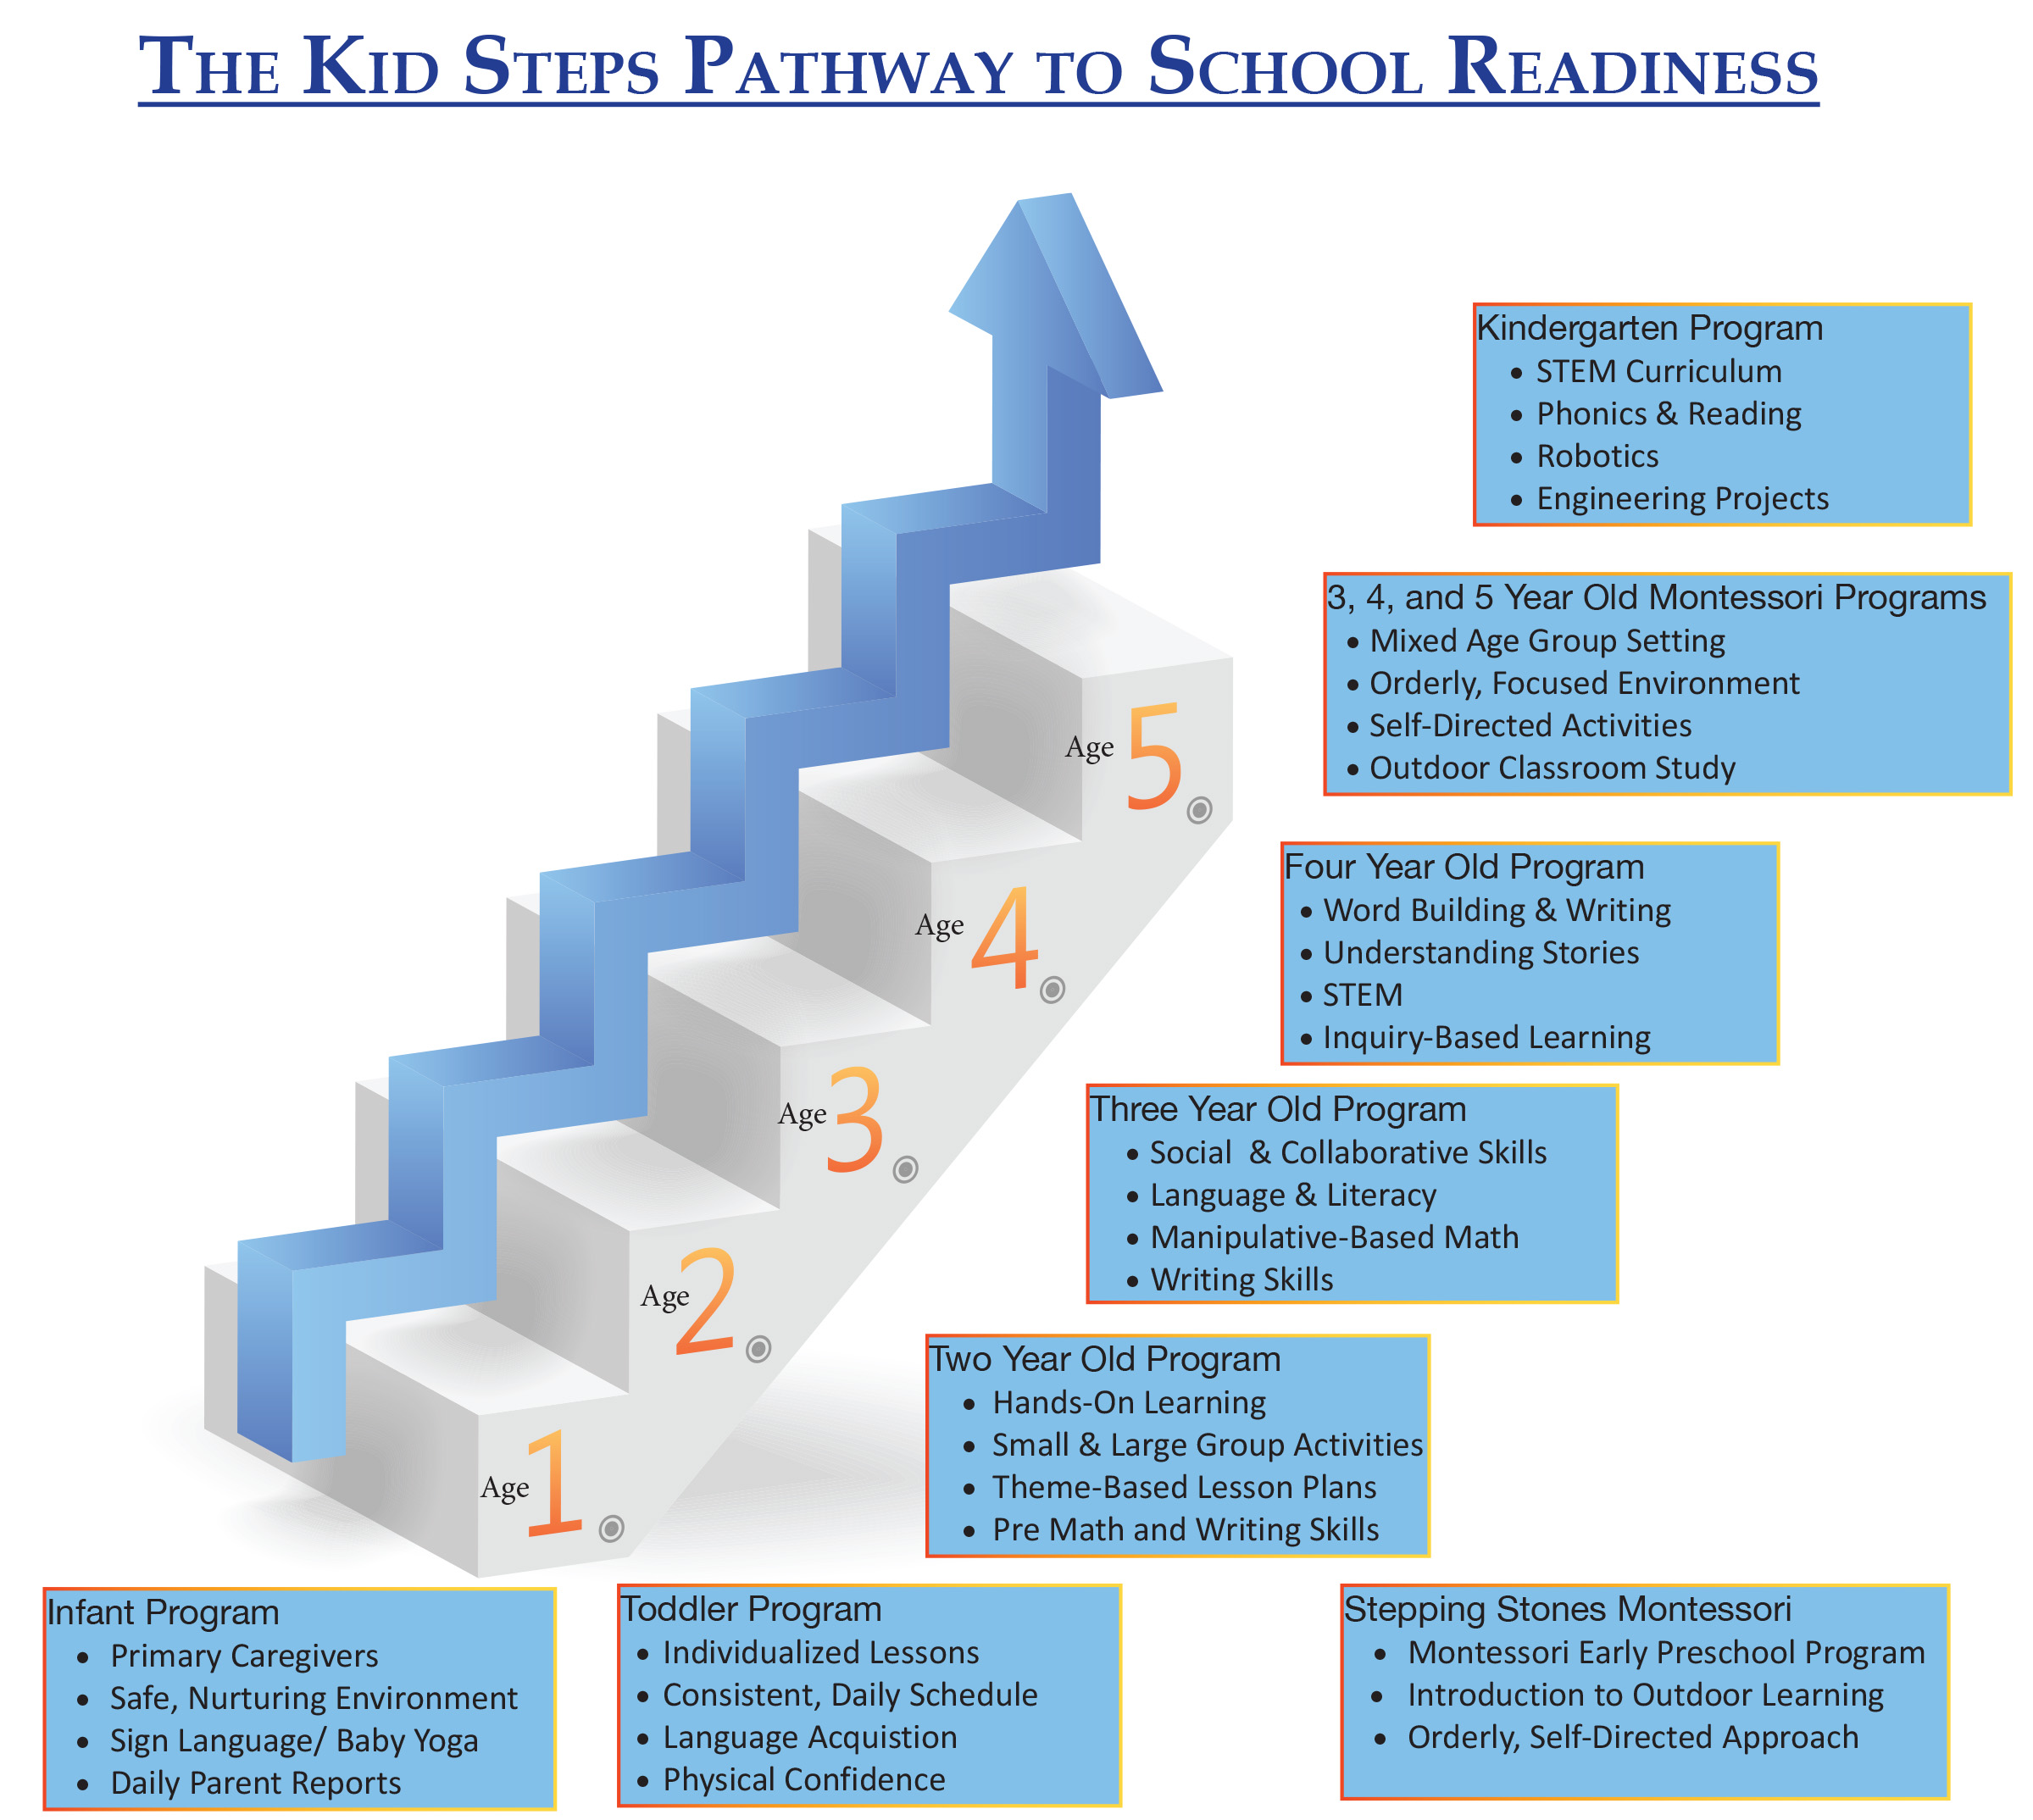 pathway_to_school_readiness - Skipwith Academy